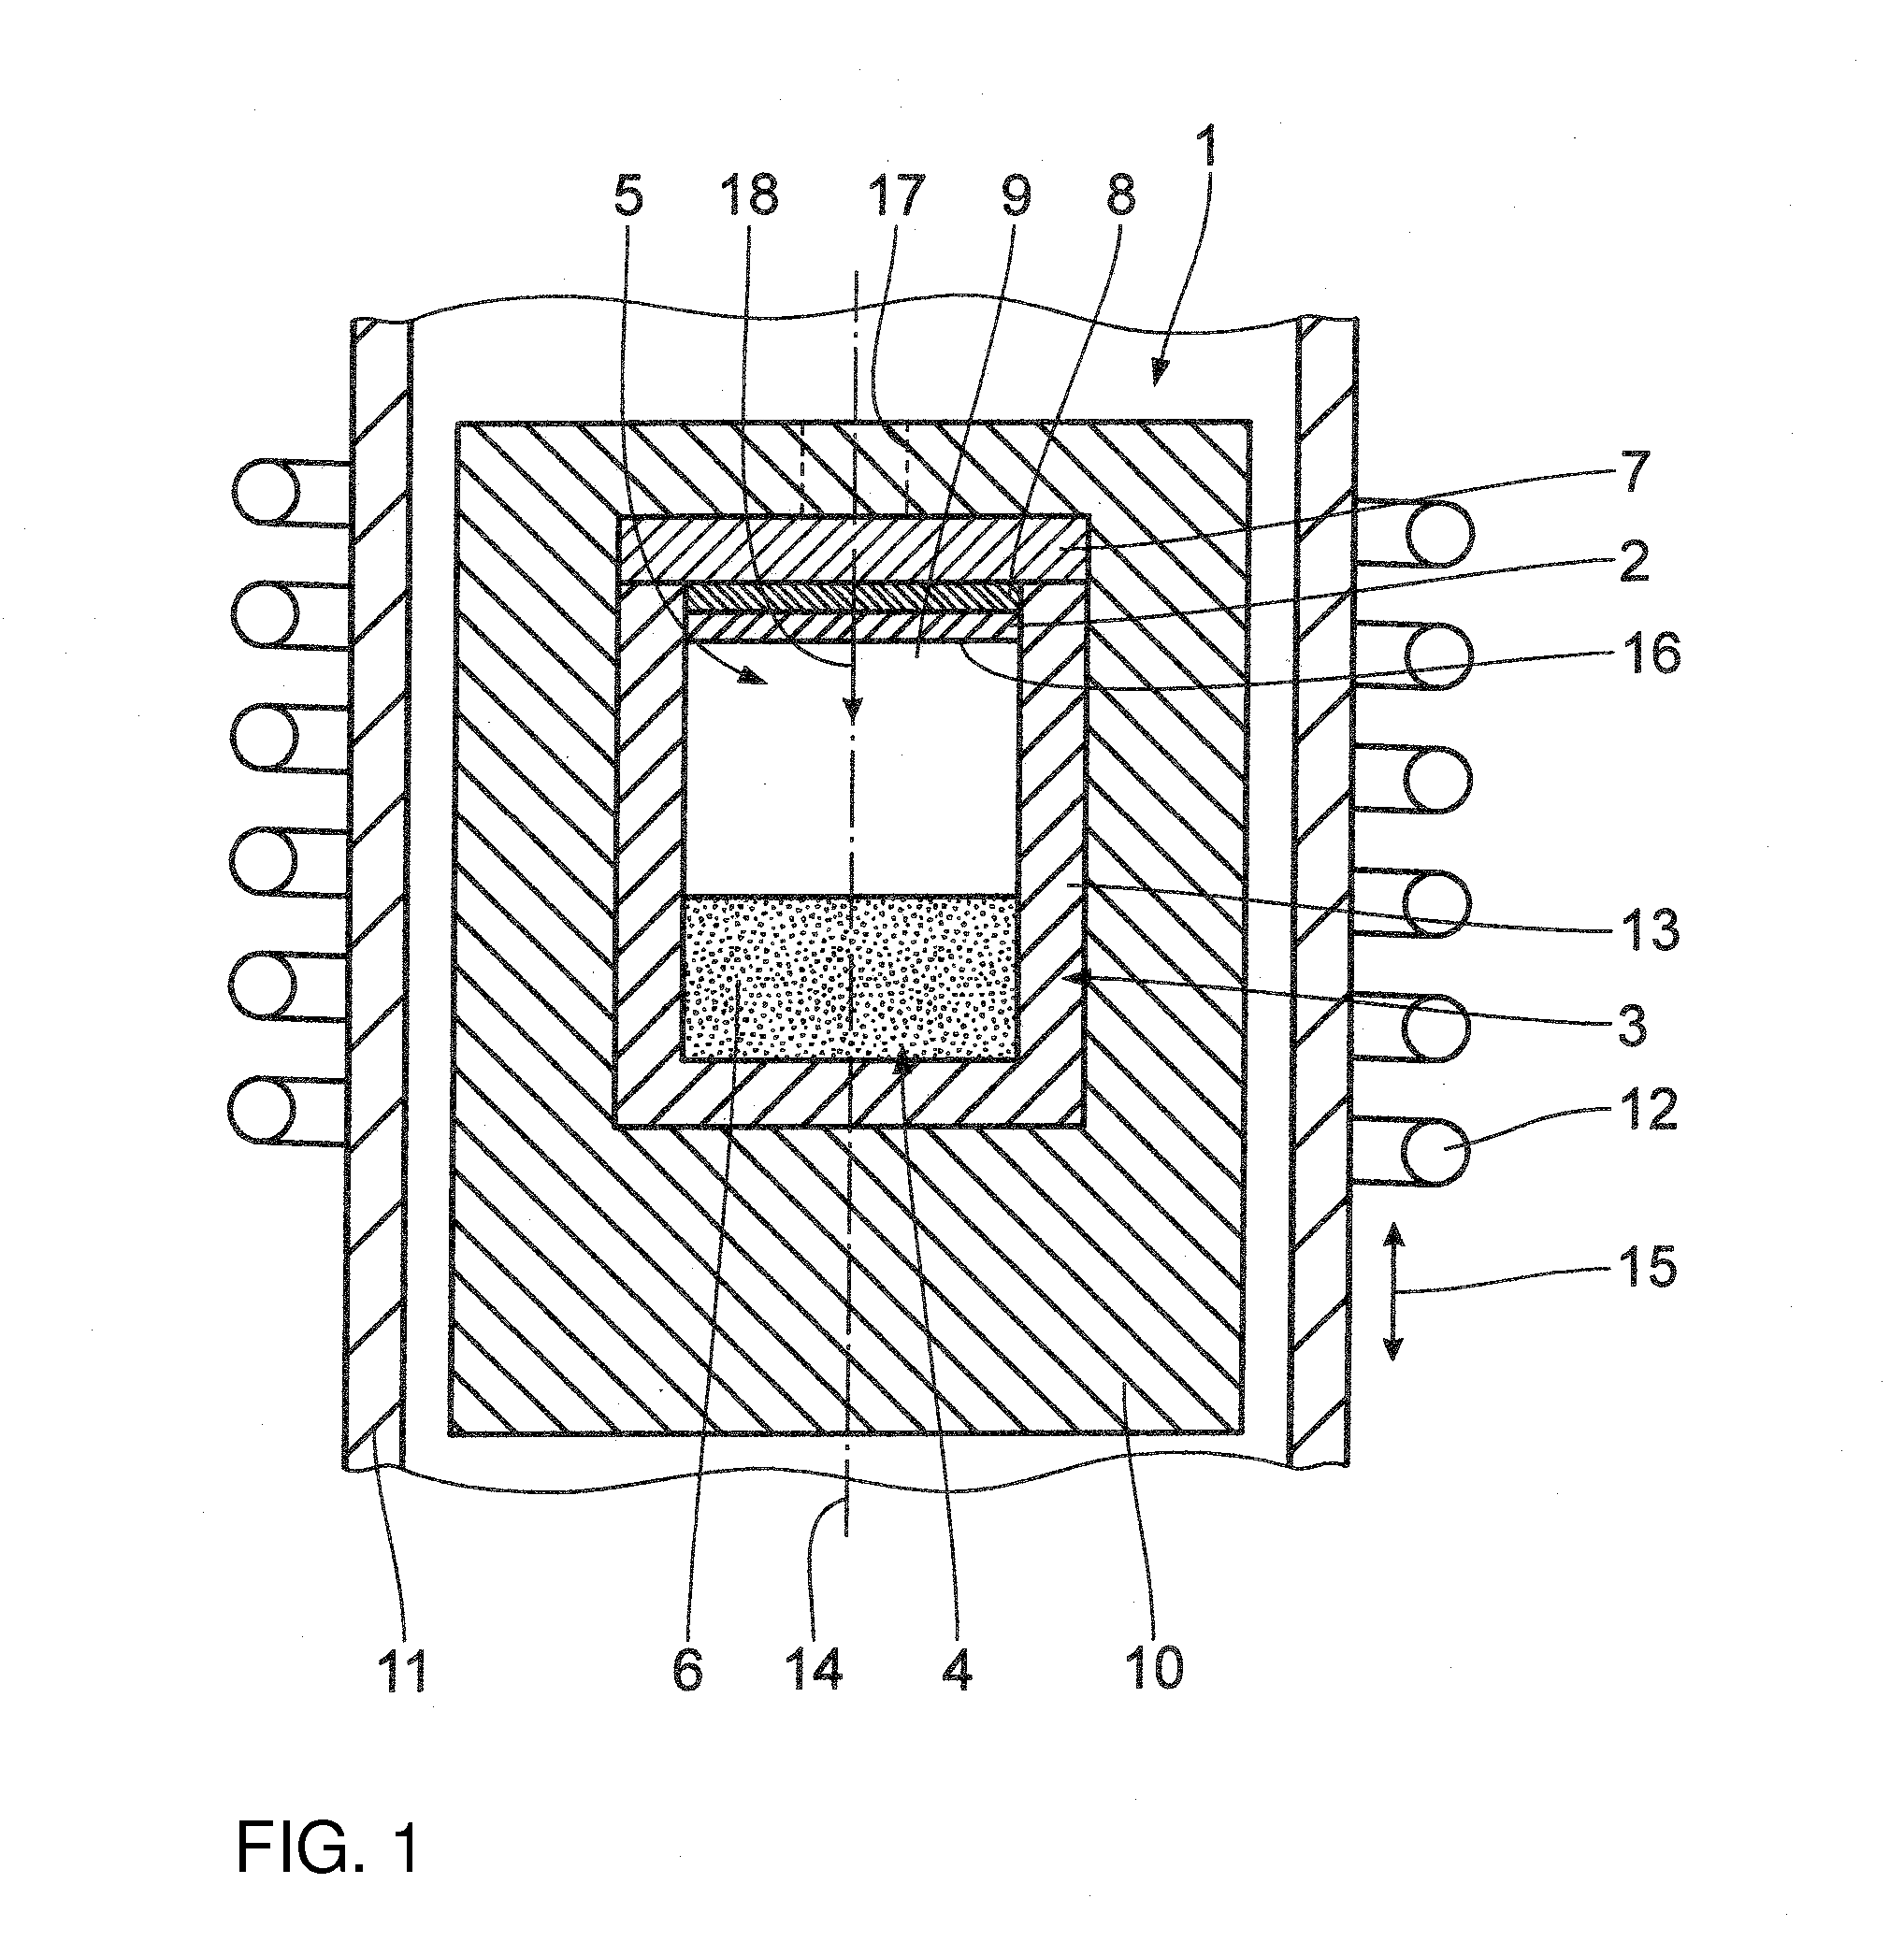 Production method for an sic volume monocrystal with a homogeneous lattice plane course and a monocrystalline sic substrate with a homogeneous lattice plane course